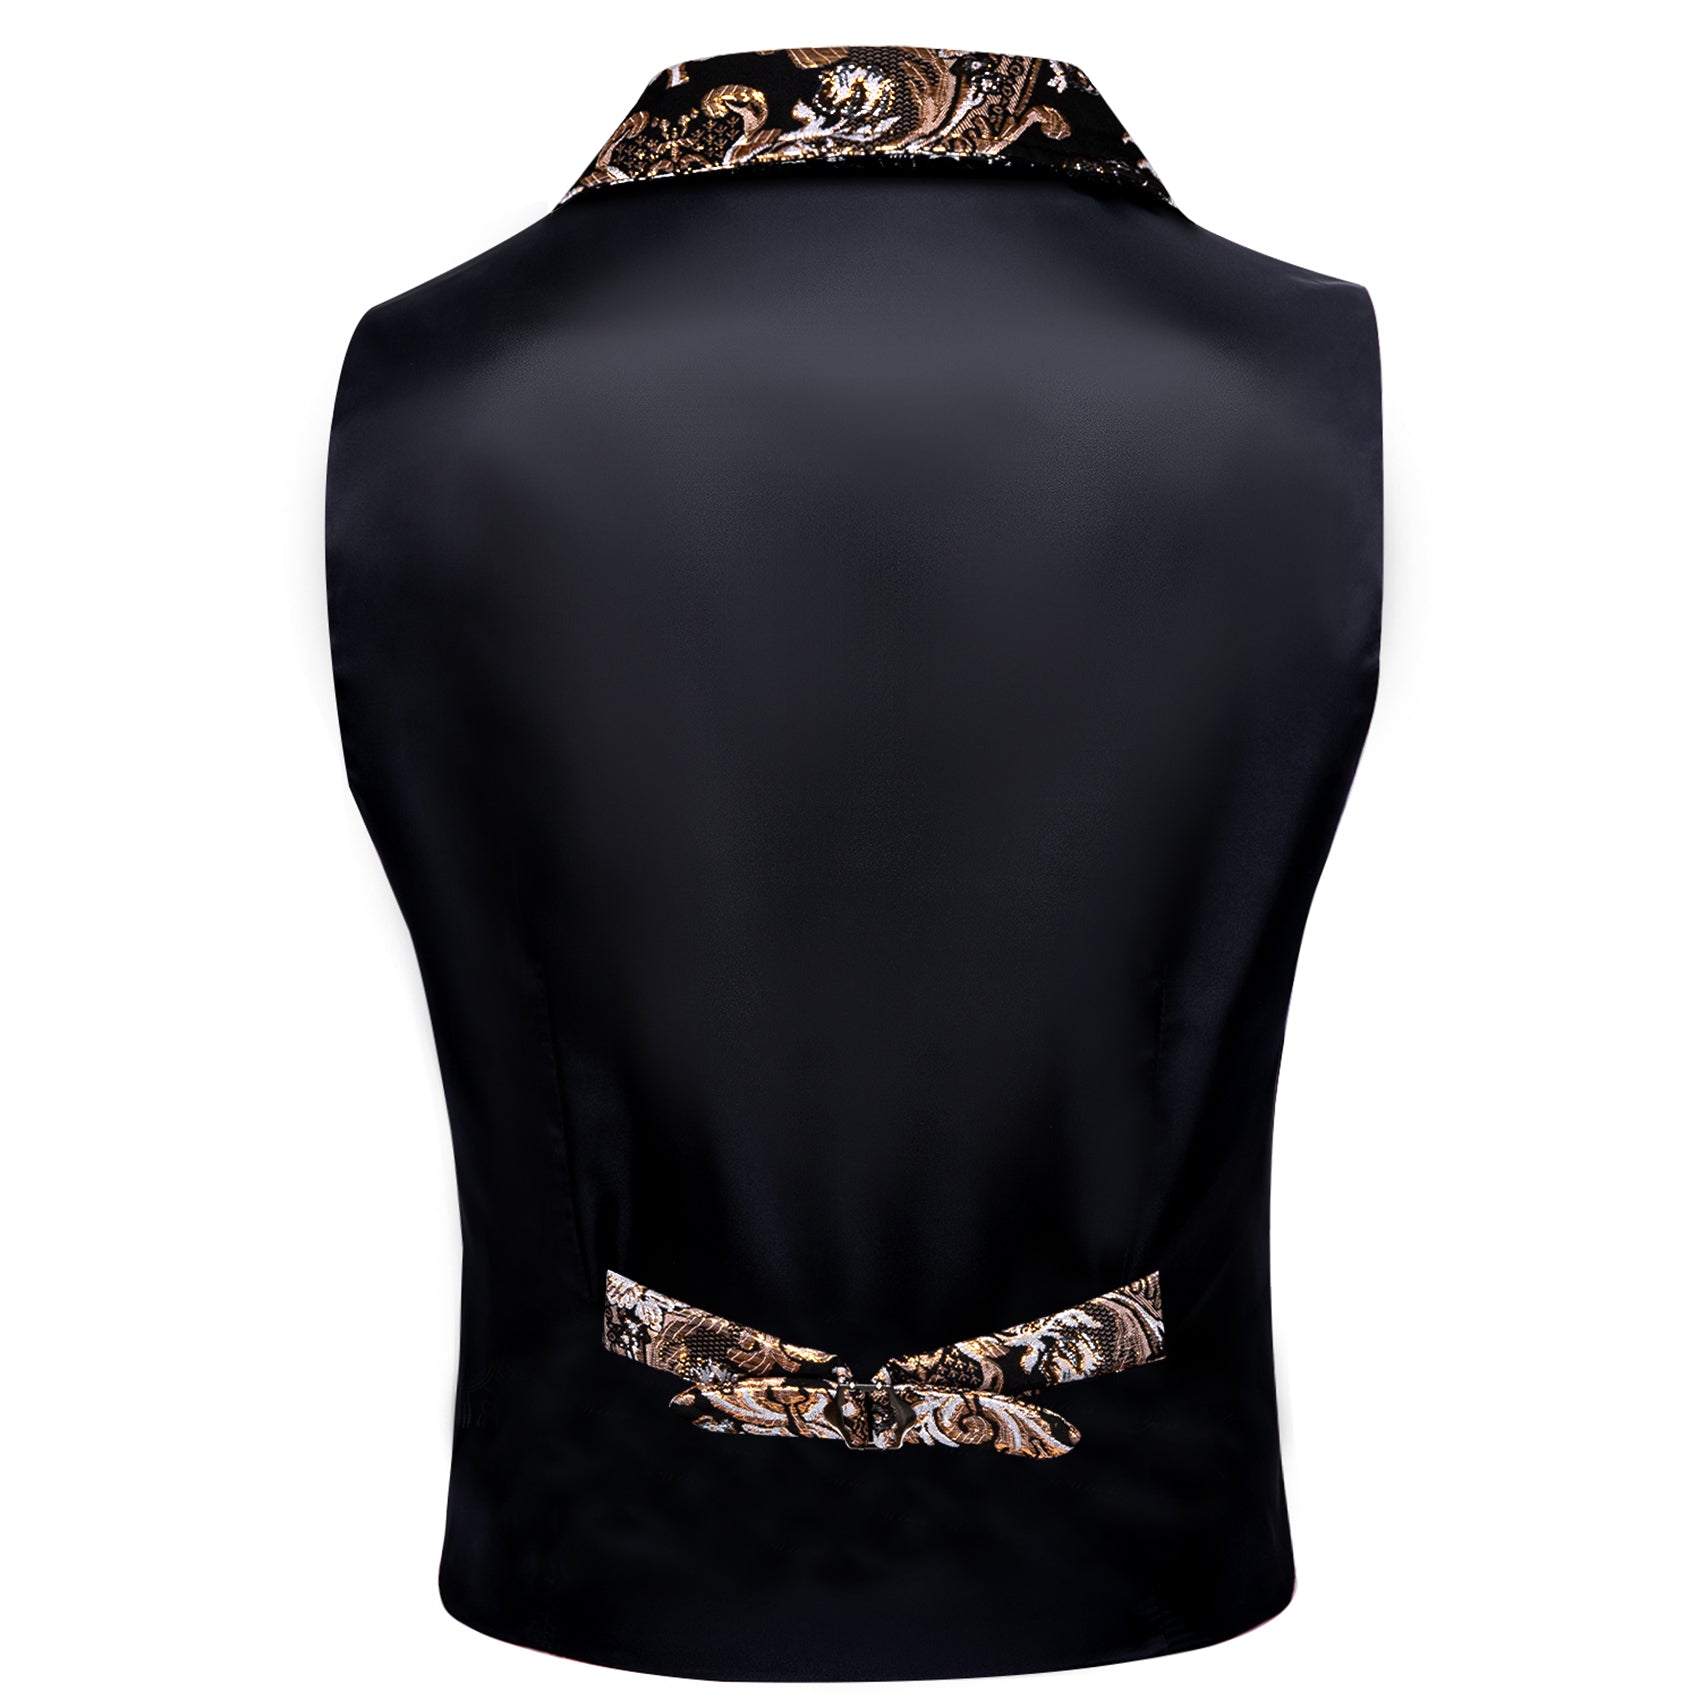 Barry.wang Men's Vest Silver Black Floral Silk Notched Collar Waistcoat Luxury